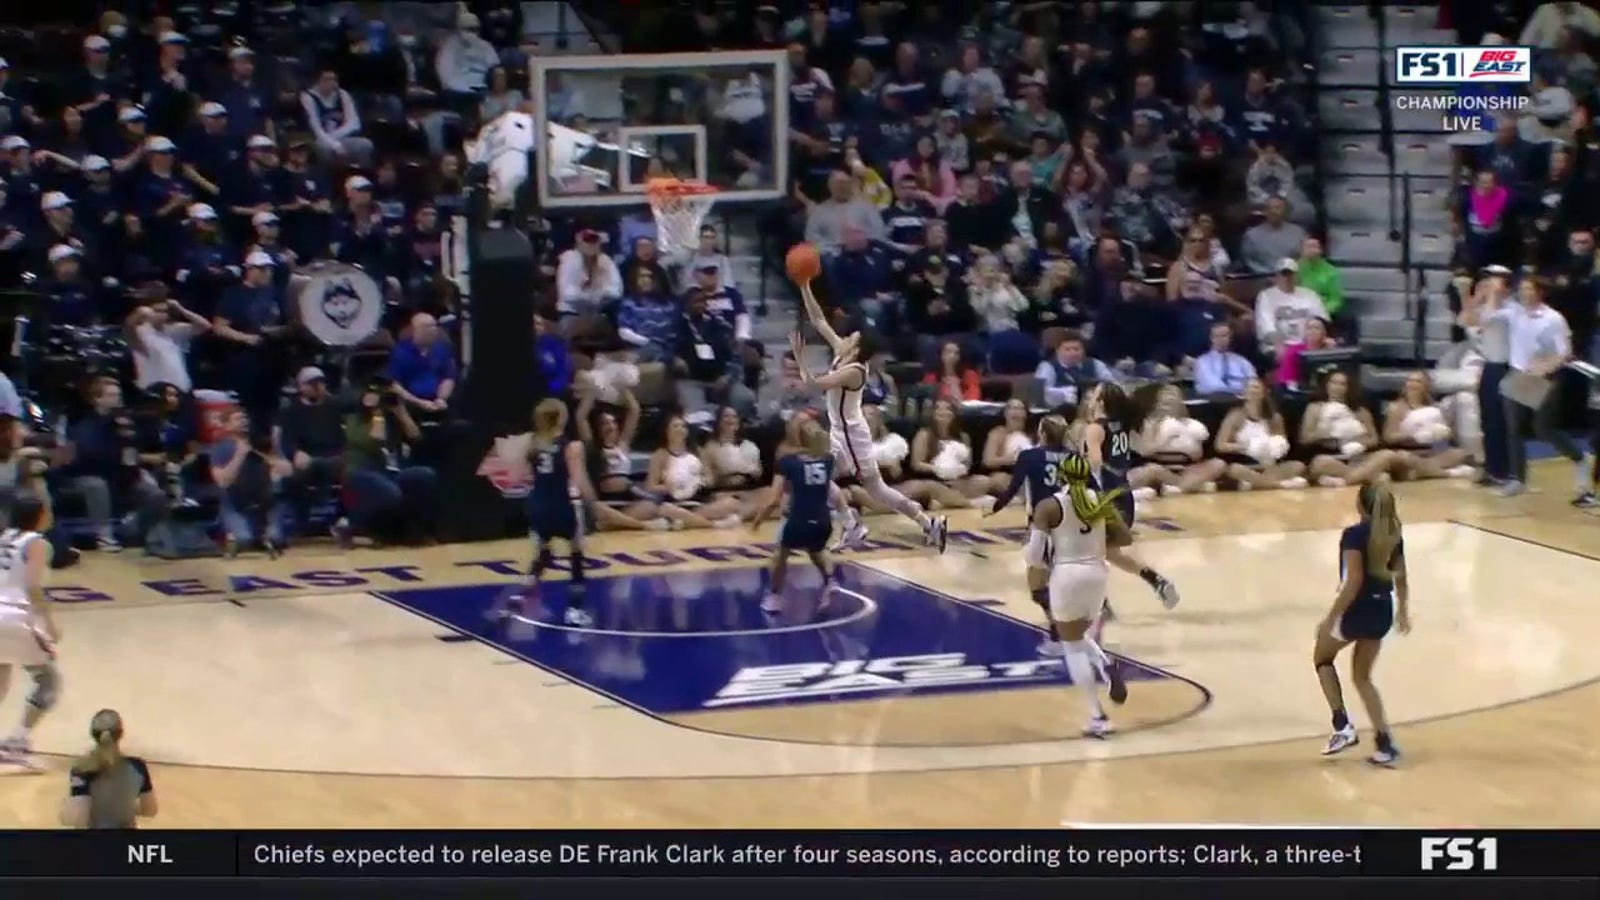 UConn's Lou Lopez Senechal extends the Huskies' lead with the help of teammate Nika Muhl